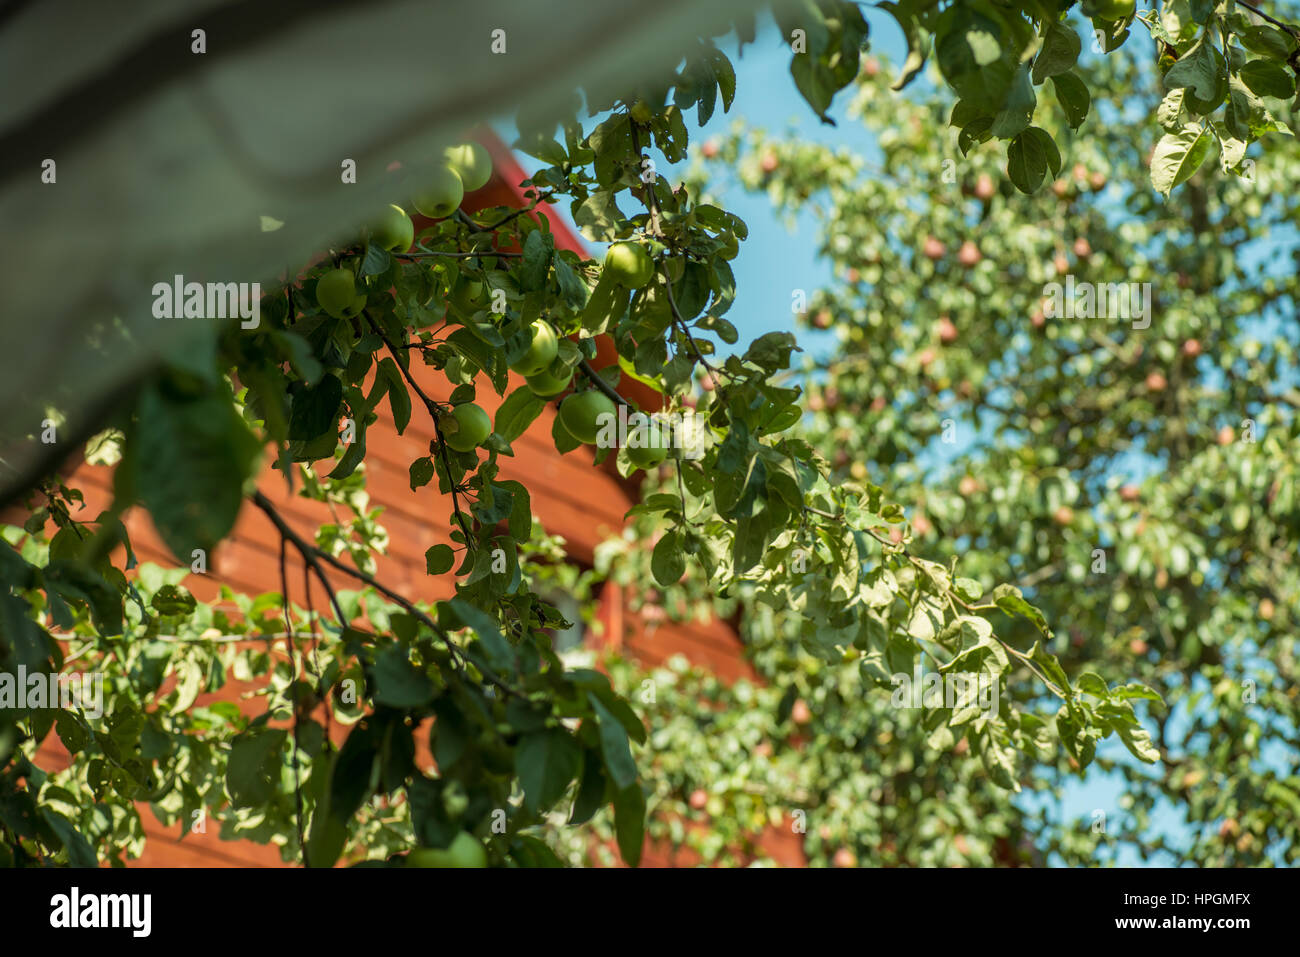 Green apples hanging on a tree branch on the background of the house roof Stock Photo